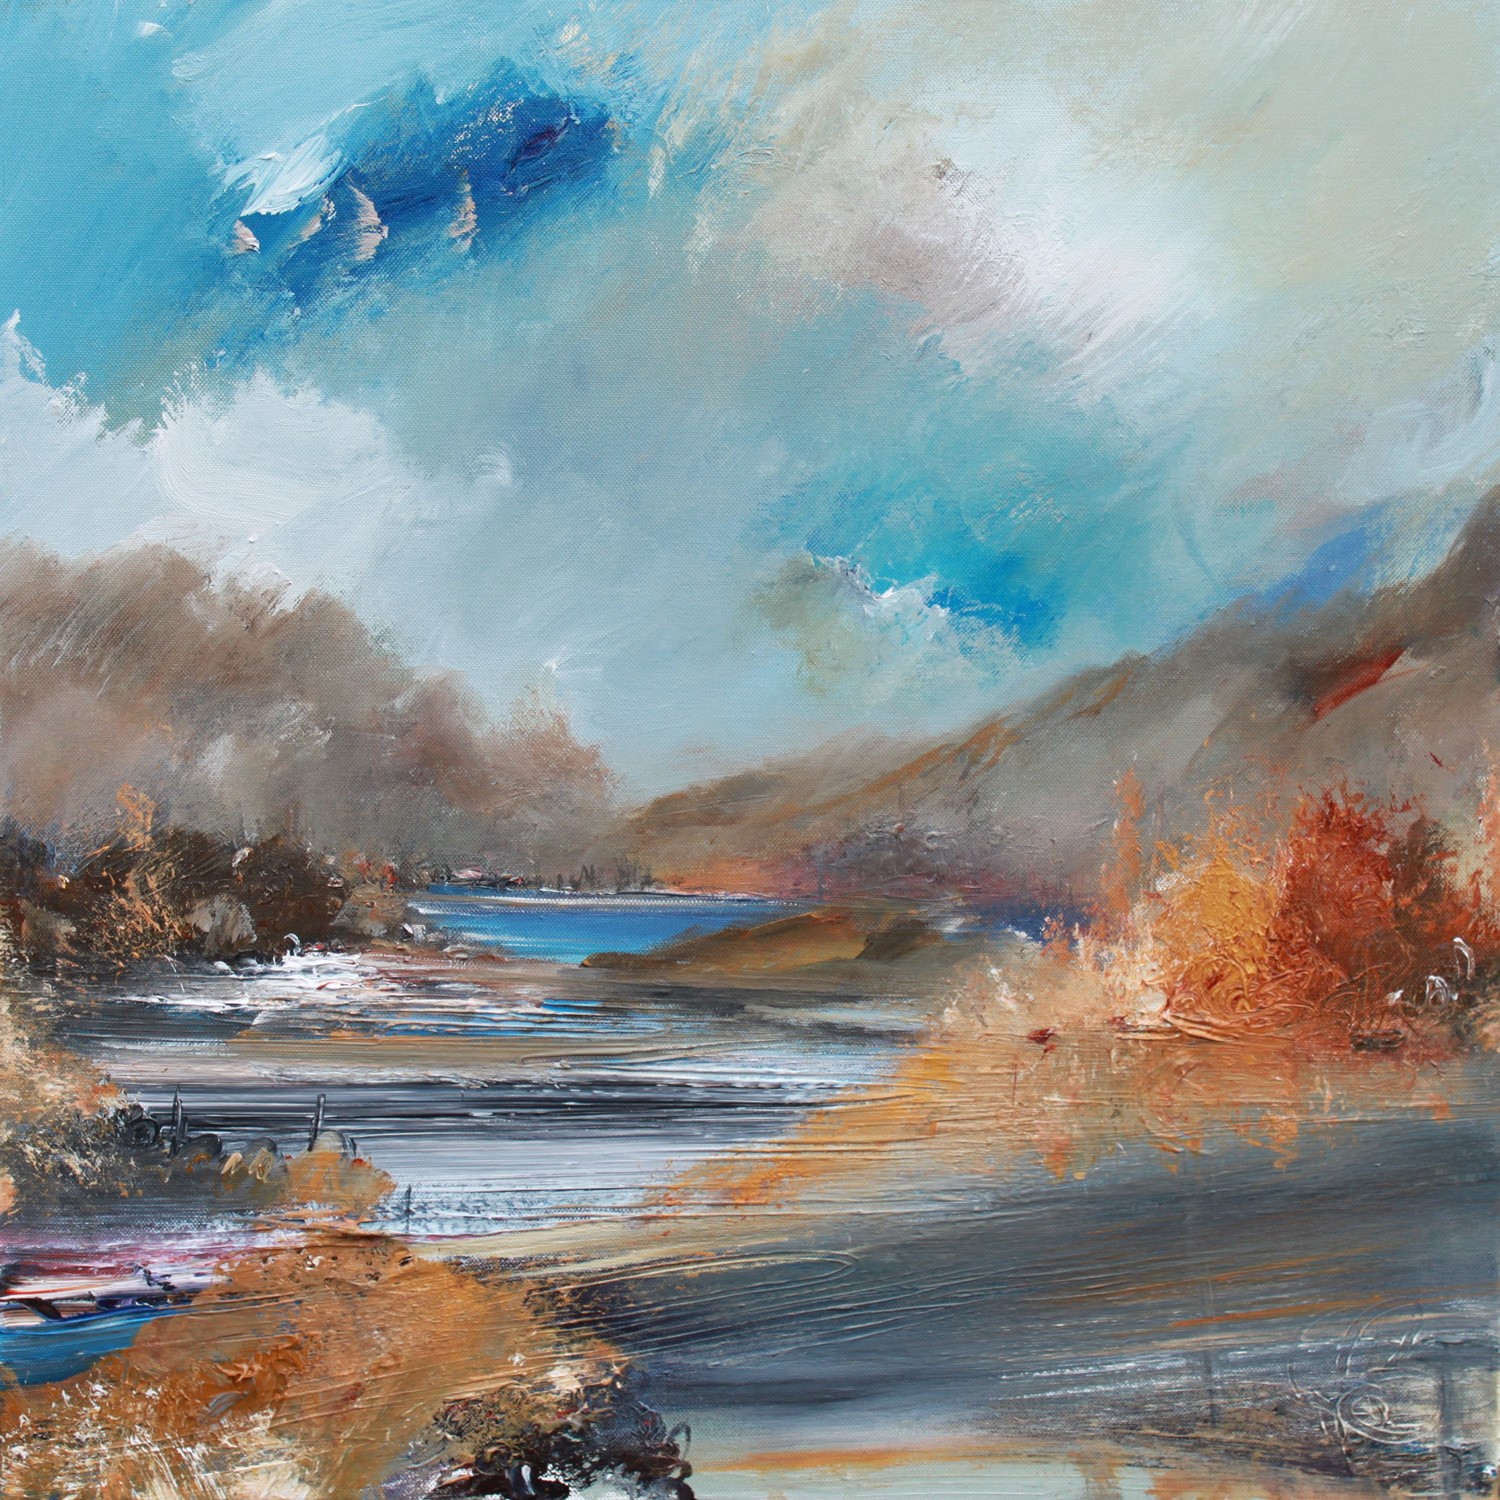 'Autumn at the River' by artist Rosanne Barr